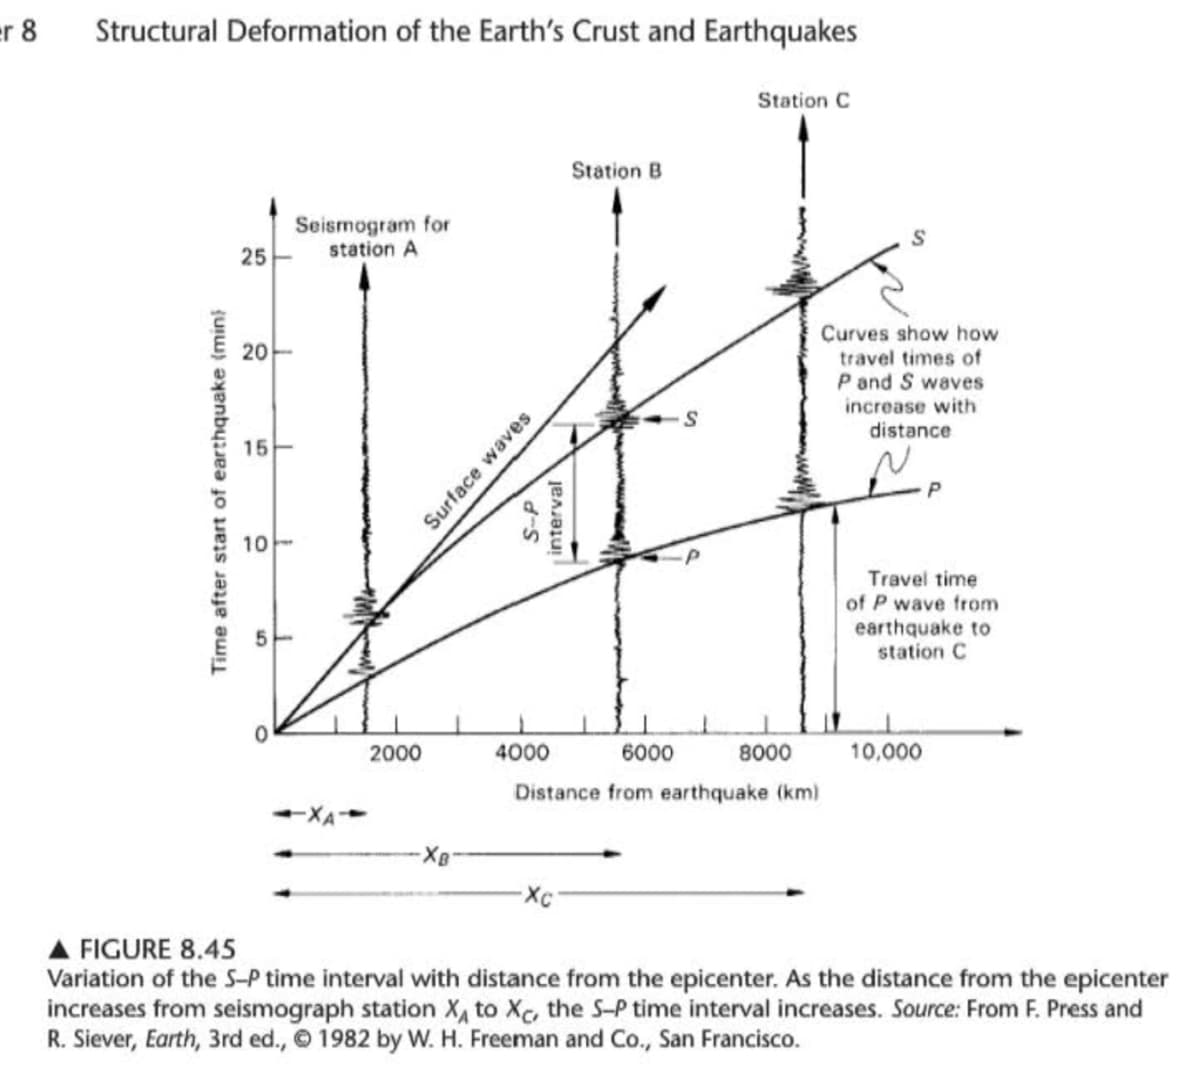 er 8
Structural Deformation of the Earth's Crust and Earthquakes
Station C
Station B
Seismogram for
station A
25
Curves show how
20
travel times of
P and S waves
increase with
distance
15
10-
Travel time
of P wave from
earthquake to
station C
2000
4000
6000
8000
10,000
Distance from earthquake (km)
A FIGURE 8.45
Variation of the S-P time interval with distance from the epicenter. As the distance from the epicenter
increases from seismograph station X, to Xc, the S-P time interval increases. Source: From F. Press and
R. Siever, Earth, 3rd ed., © 1982 by W. H. Freeman and Co., San Francisco.
Time after start of earthquake (min}
Surface waves
|interval
